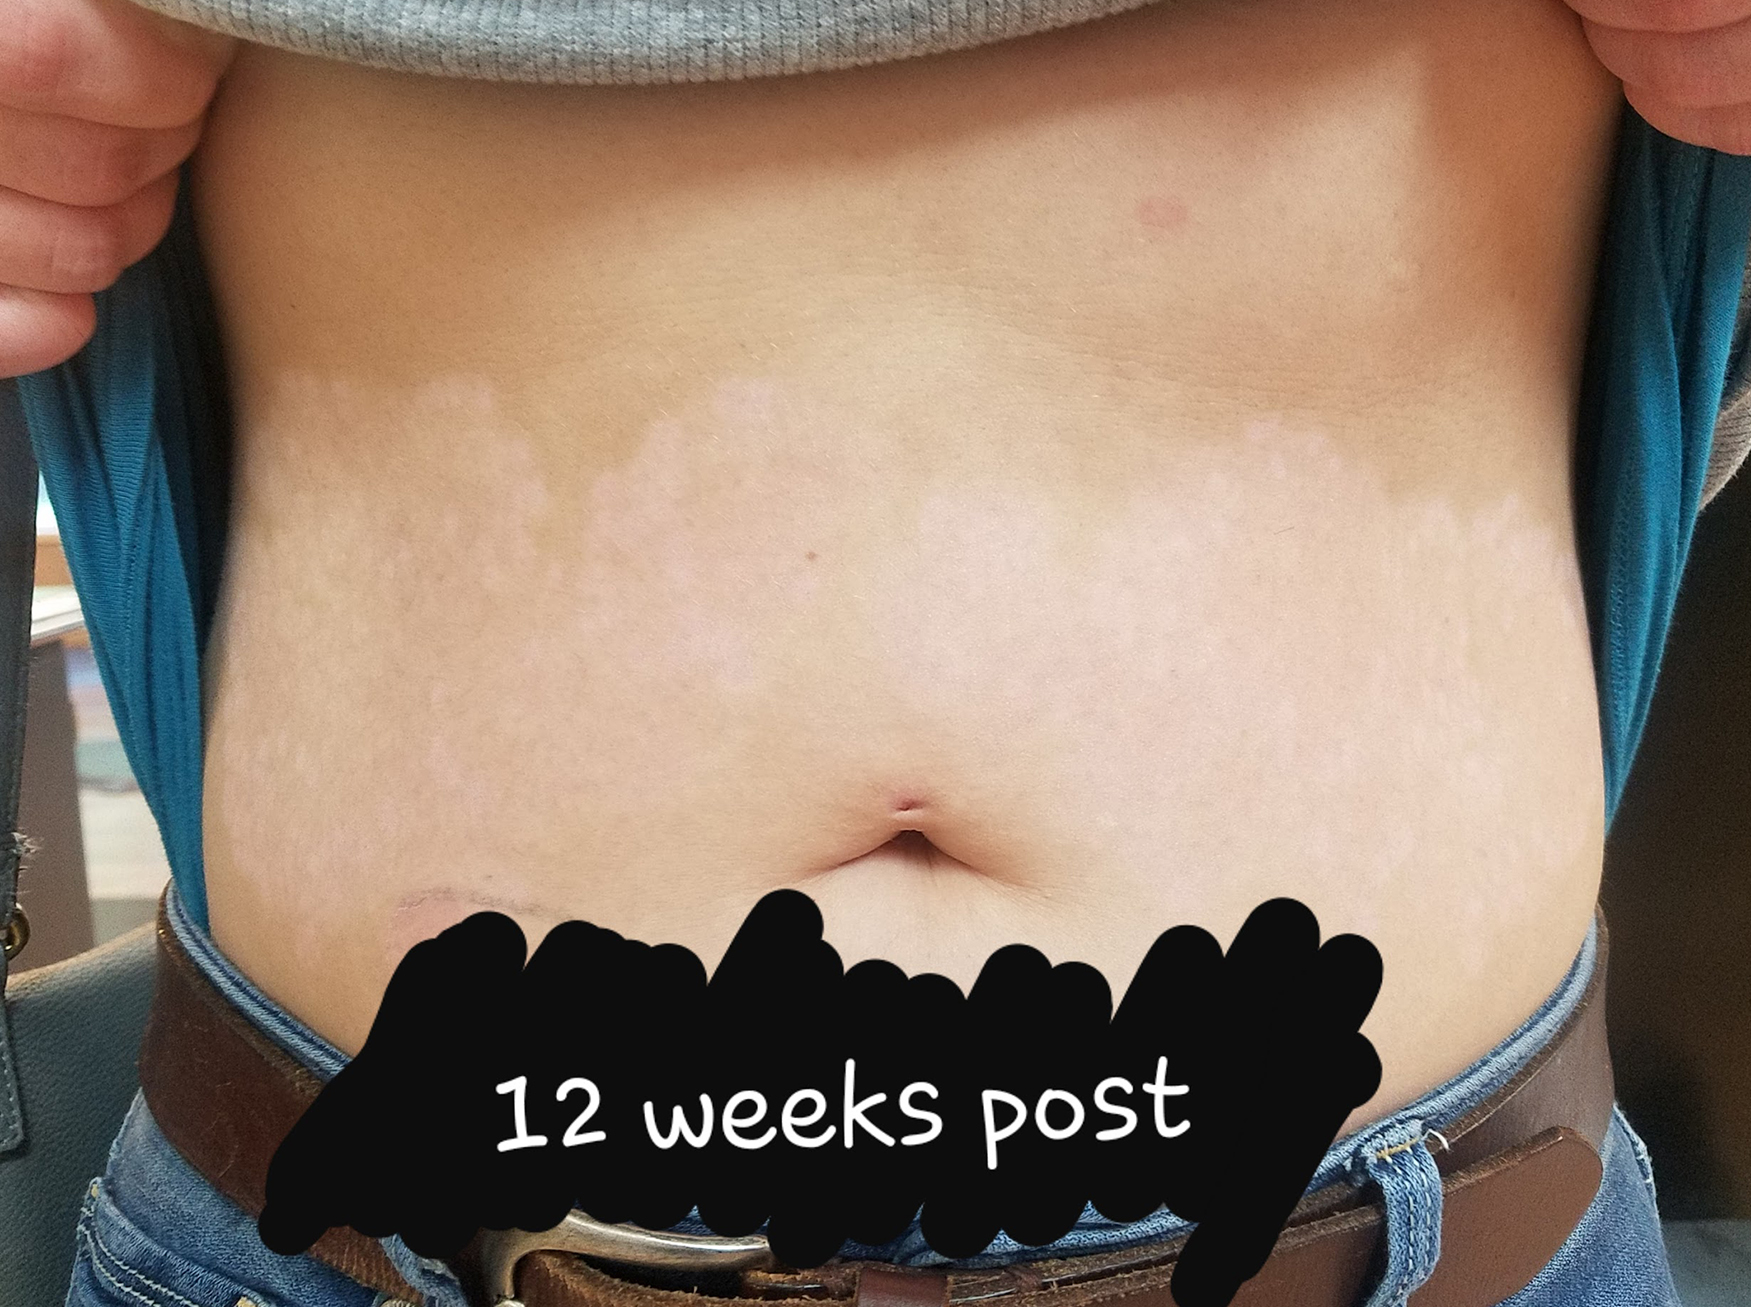 12 weeks of the persons stomach after sugaring